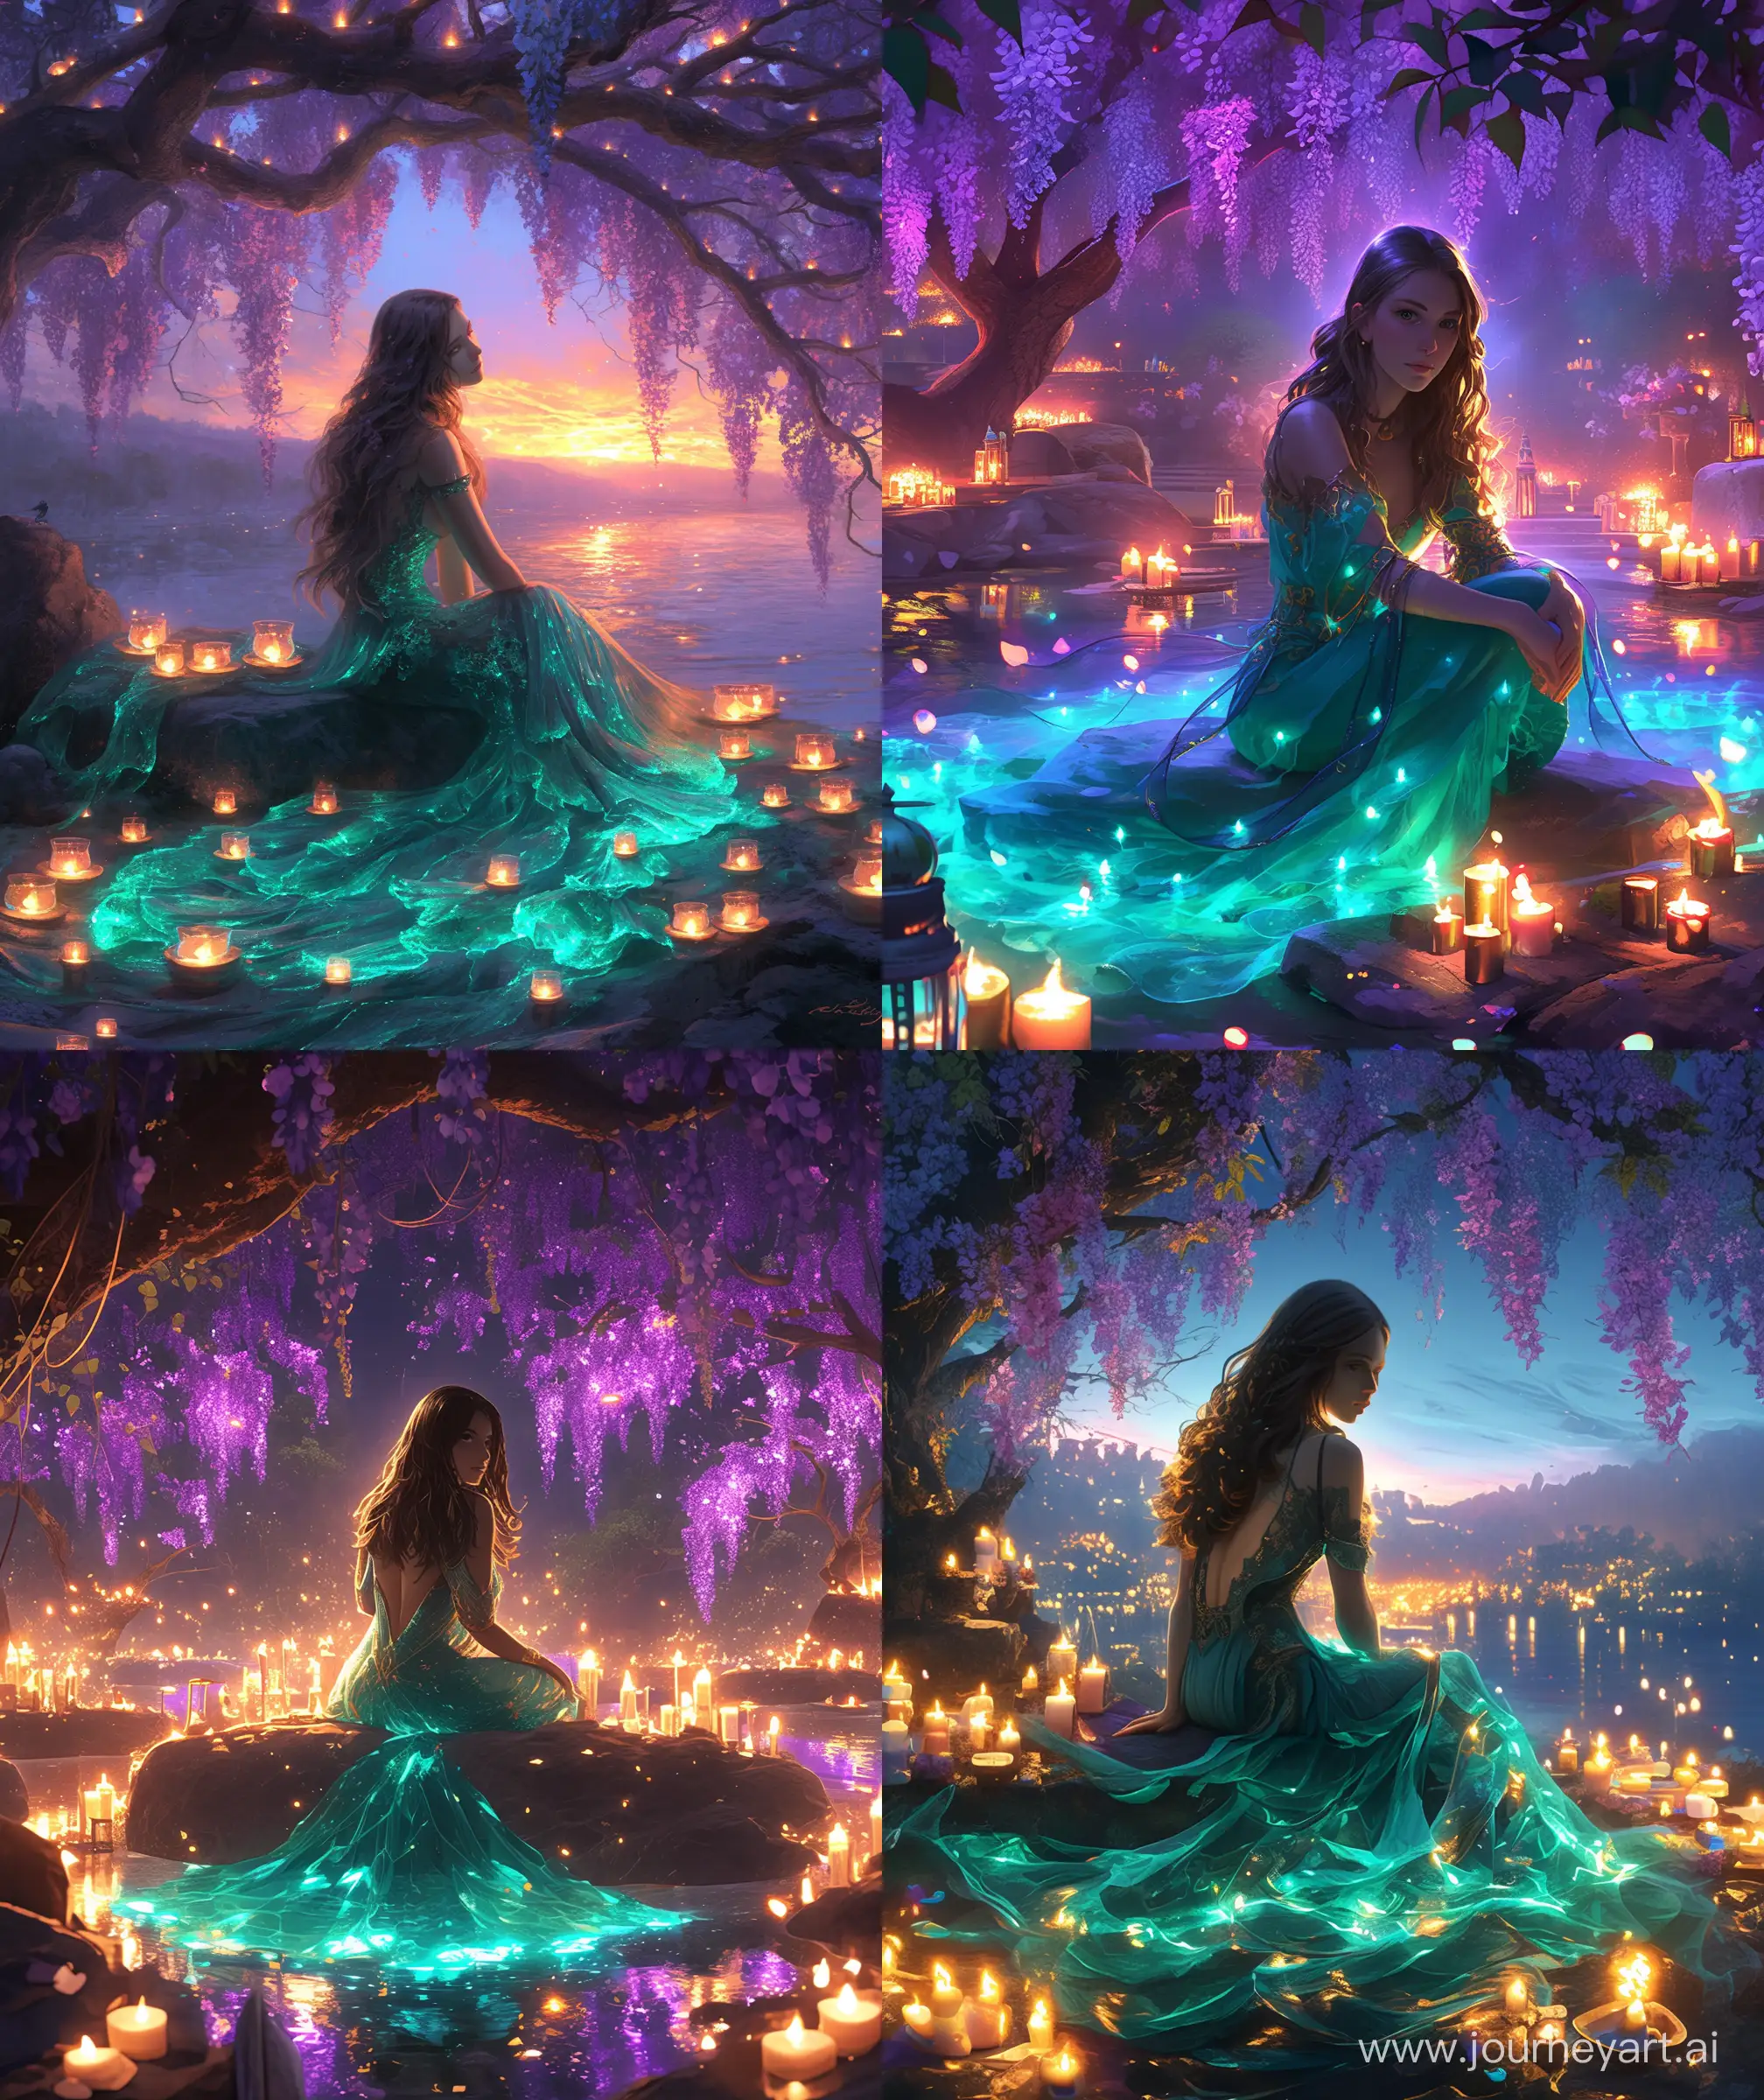 Enchanting-Woman-Surrounded-by-Colorful-Candles-under-a-Wisteria-Tree-at-Night